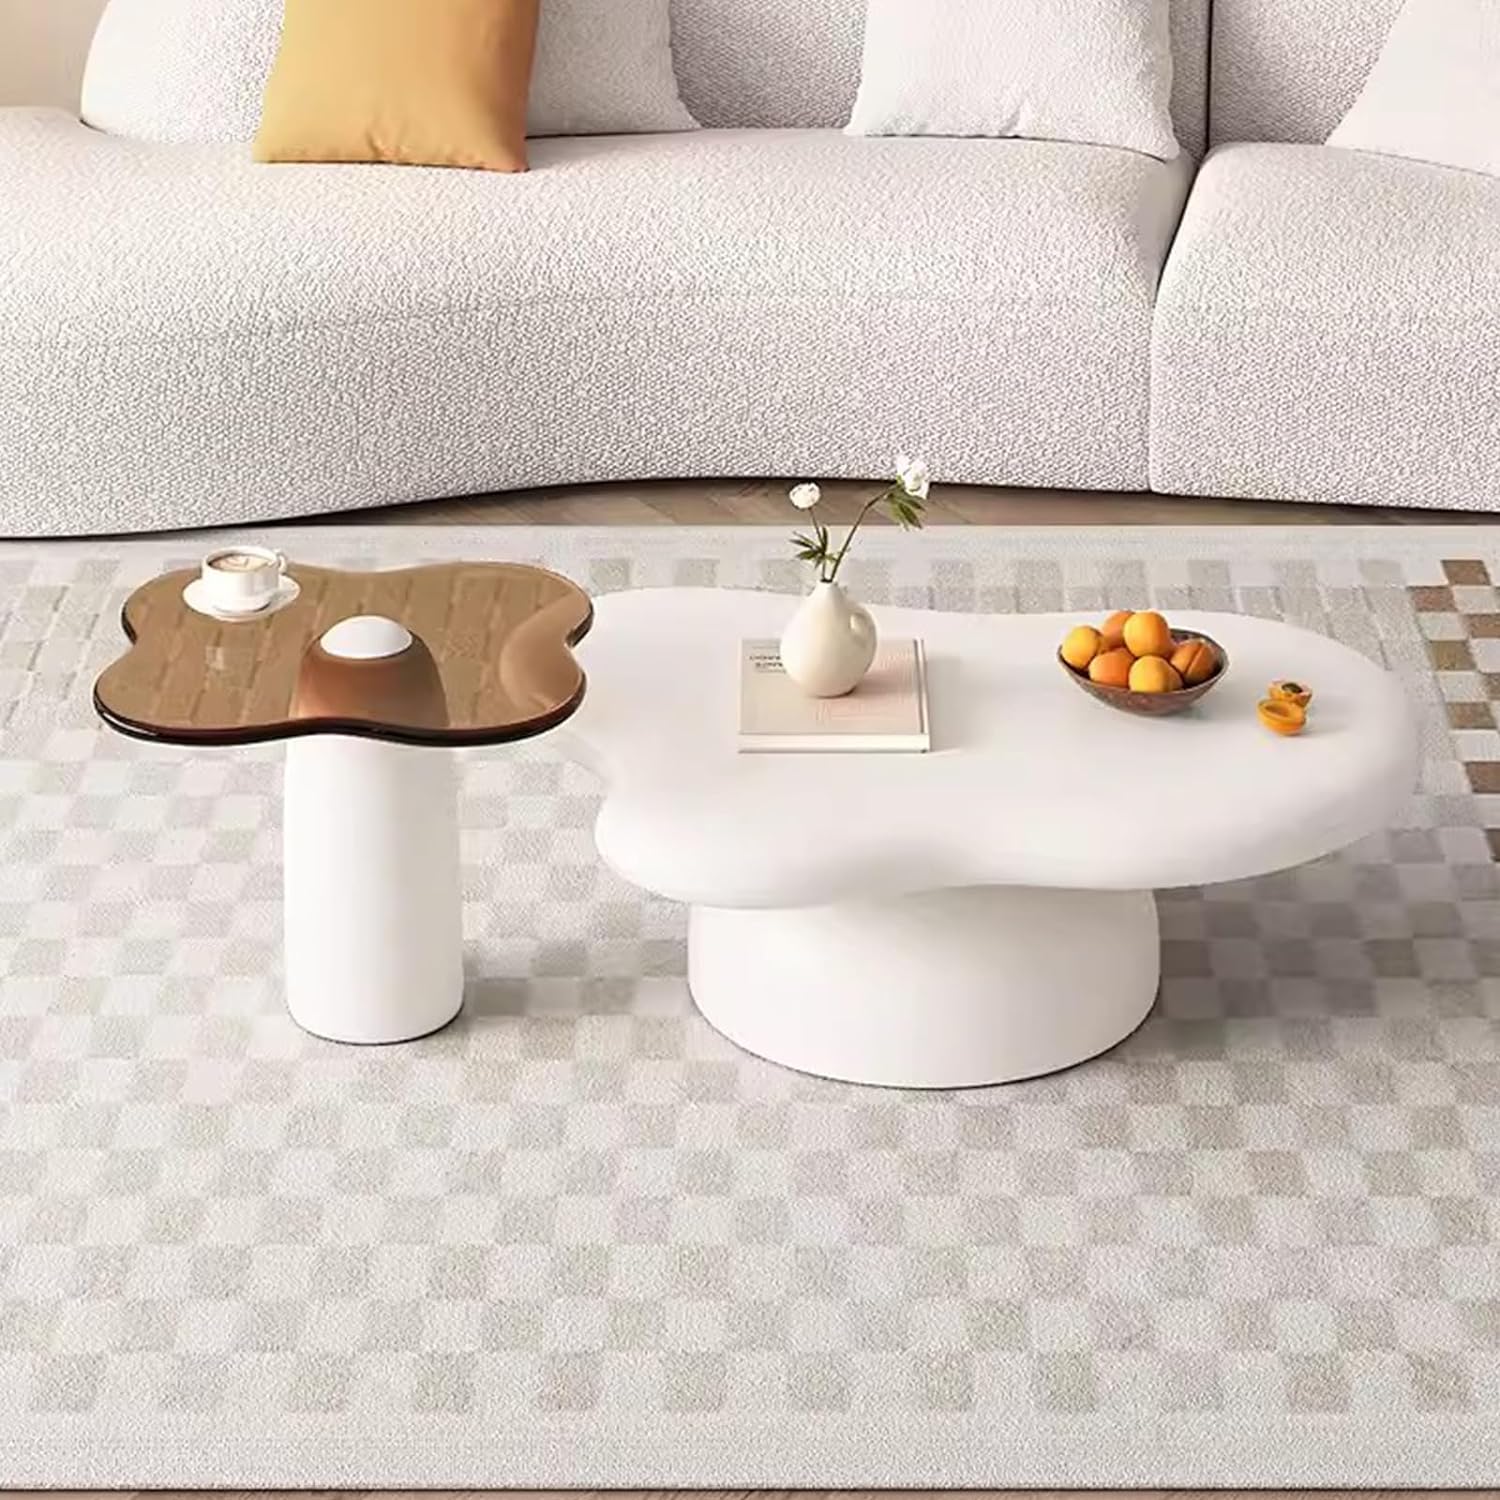 Cloud Coffee Table Set of 2, Modern Irregular Coffee Table with Small End Table - $240